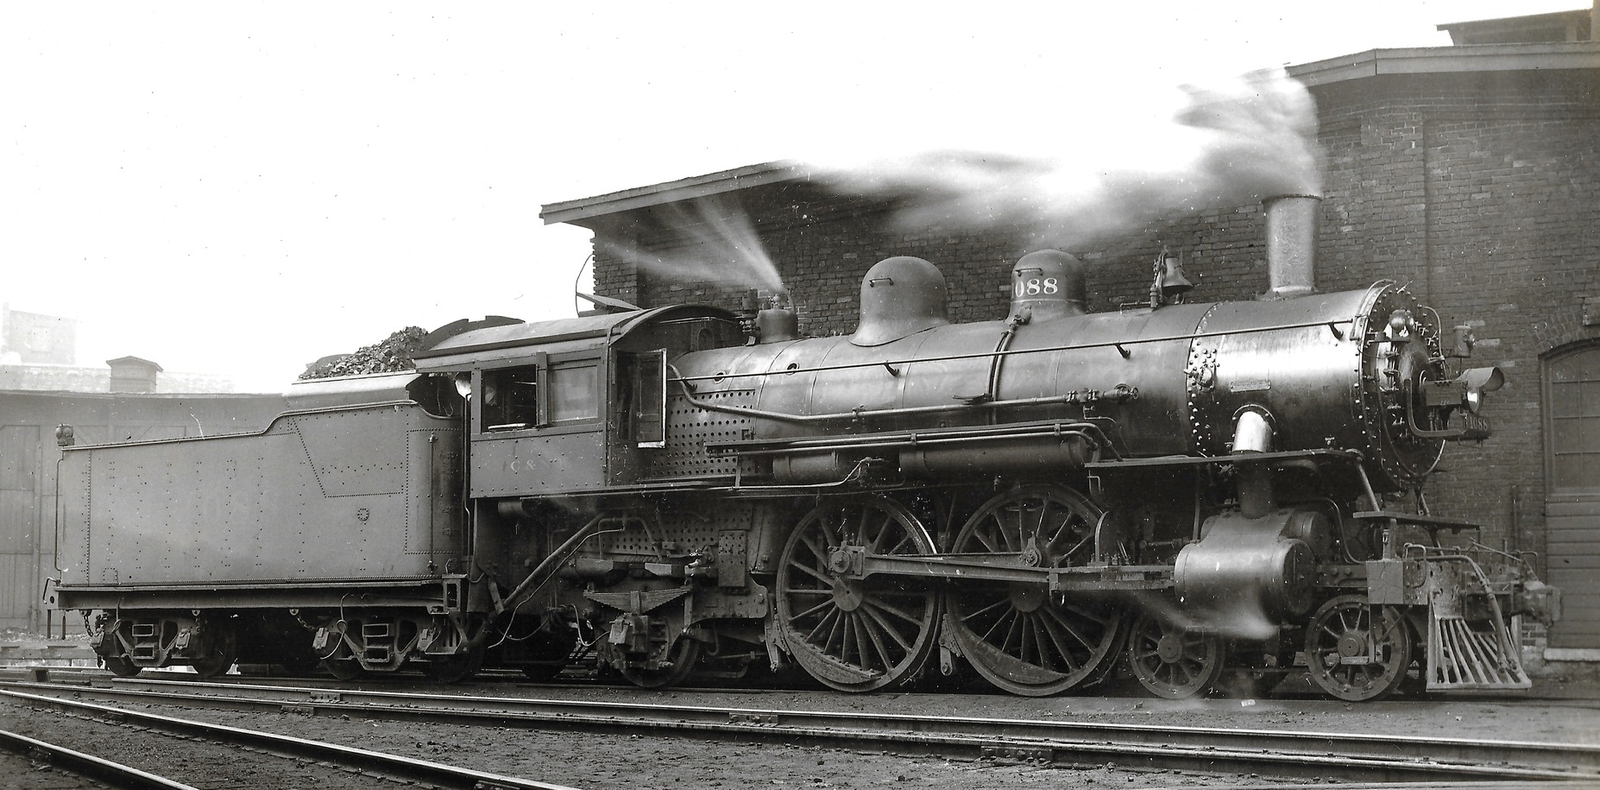 No. 1088 in March 1936 in Milwaukee, Wisconsin